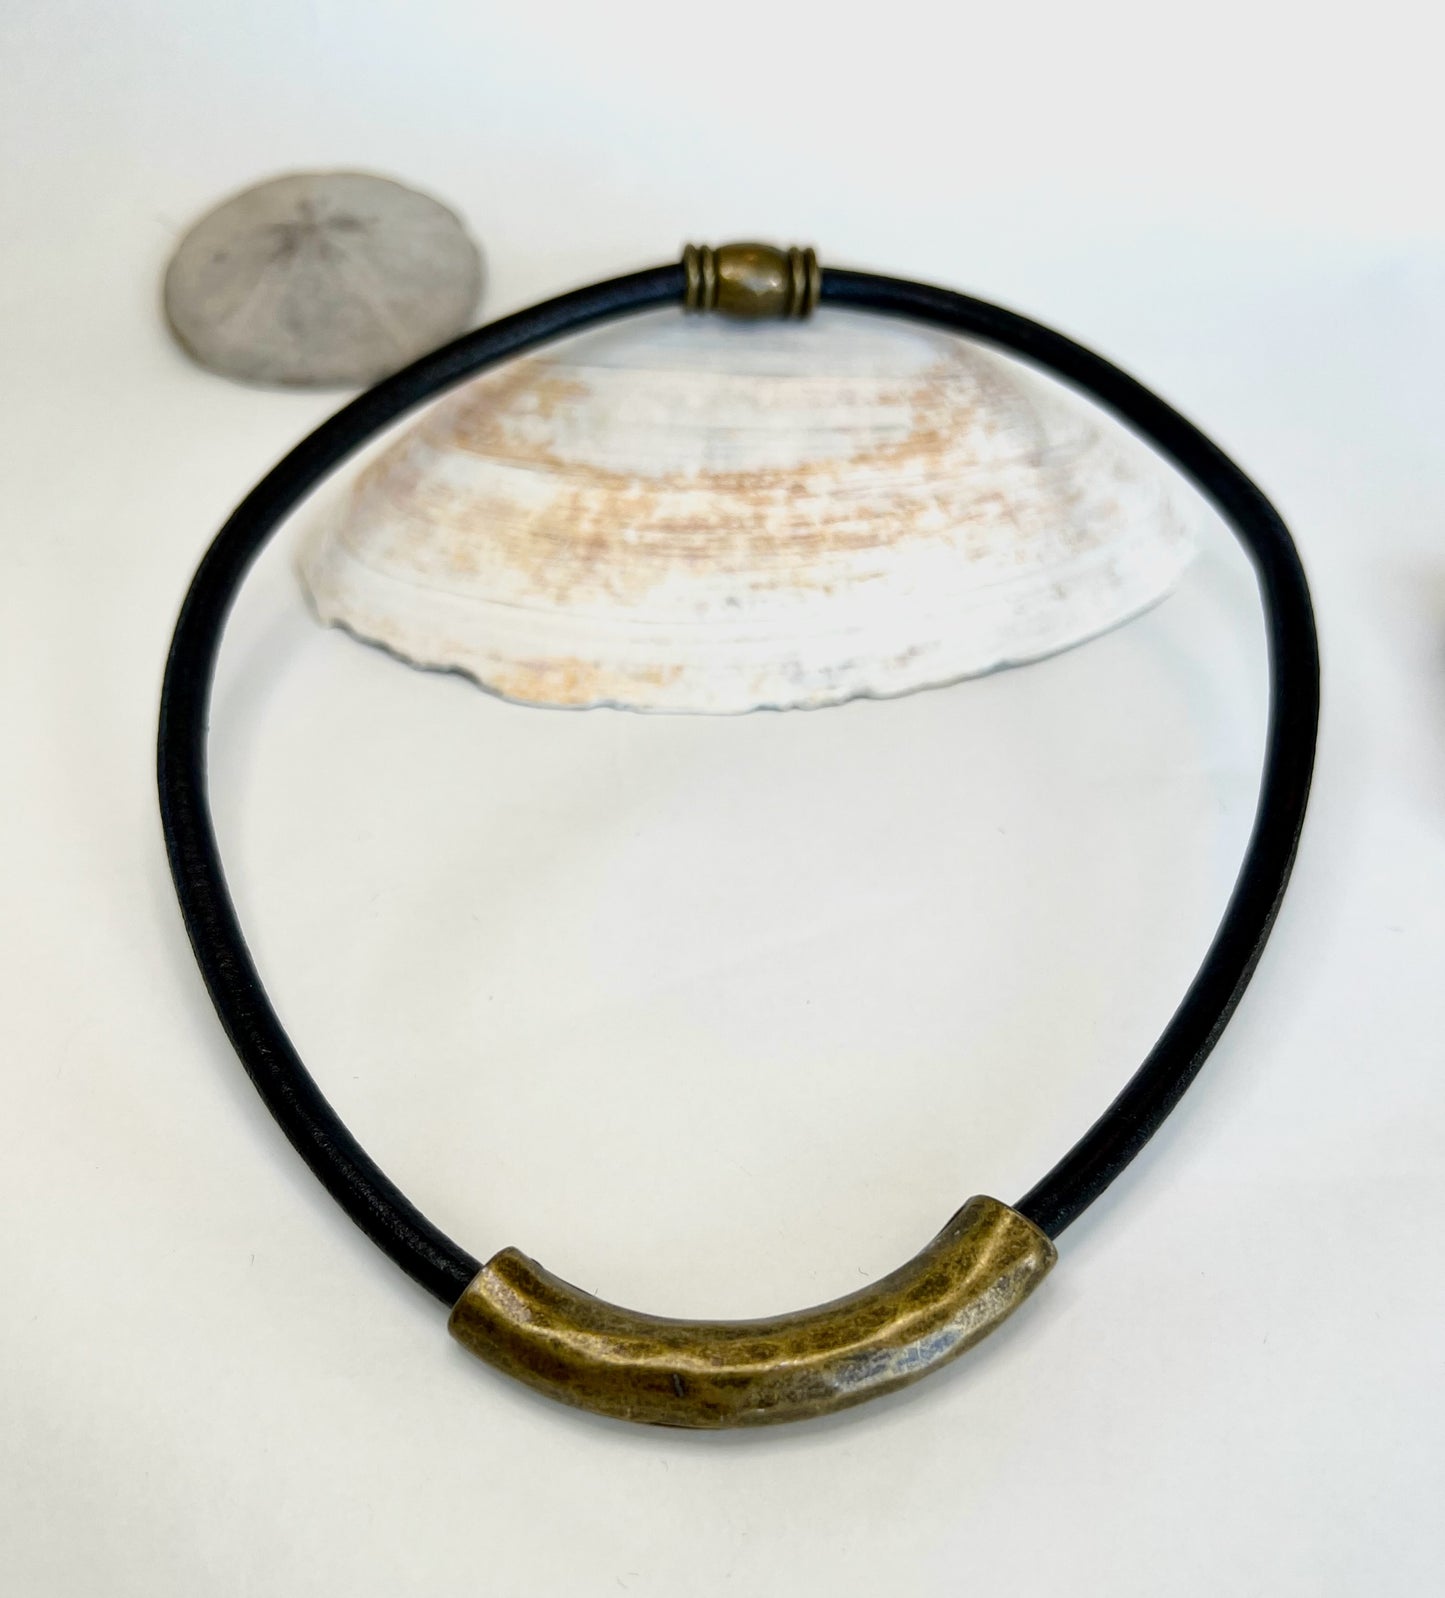 Leather Necklace. Beautiful Italian black leather choker necklace fashioned with a center curved brass tube. Finished with a magnetic clasp.